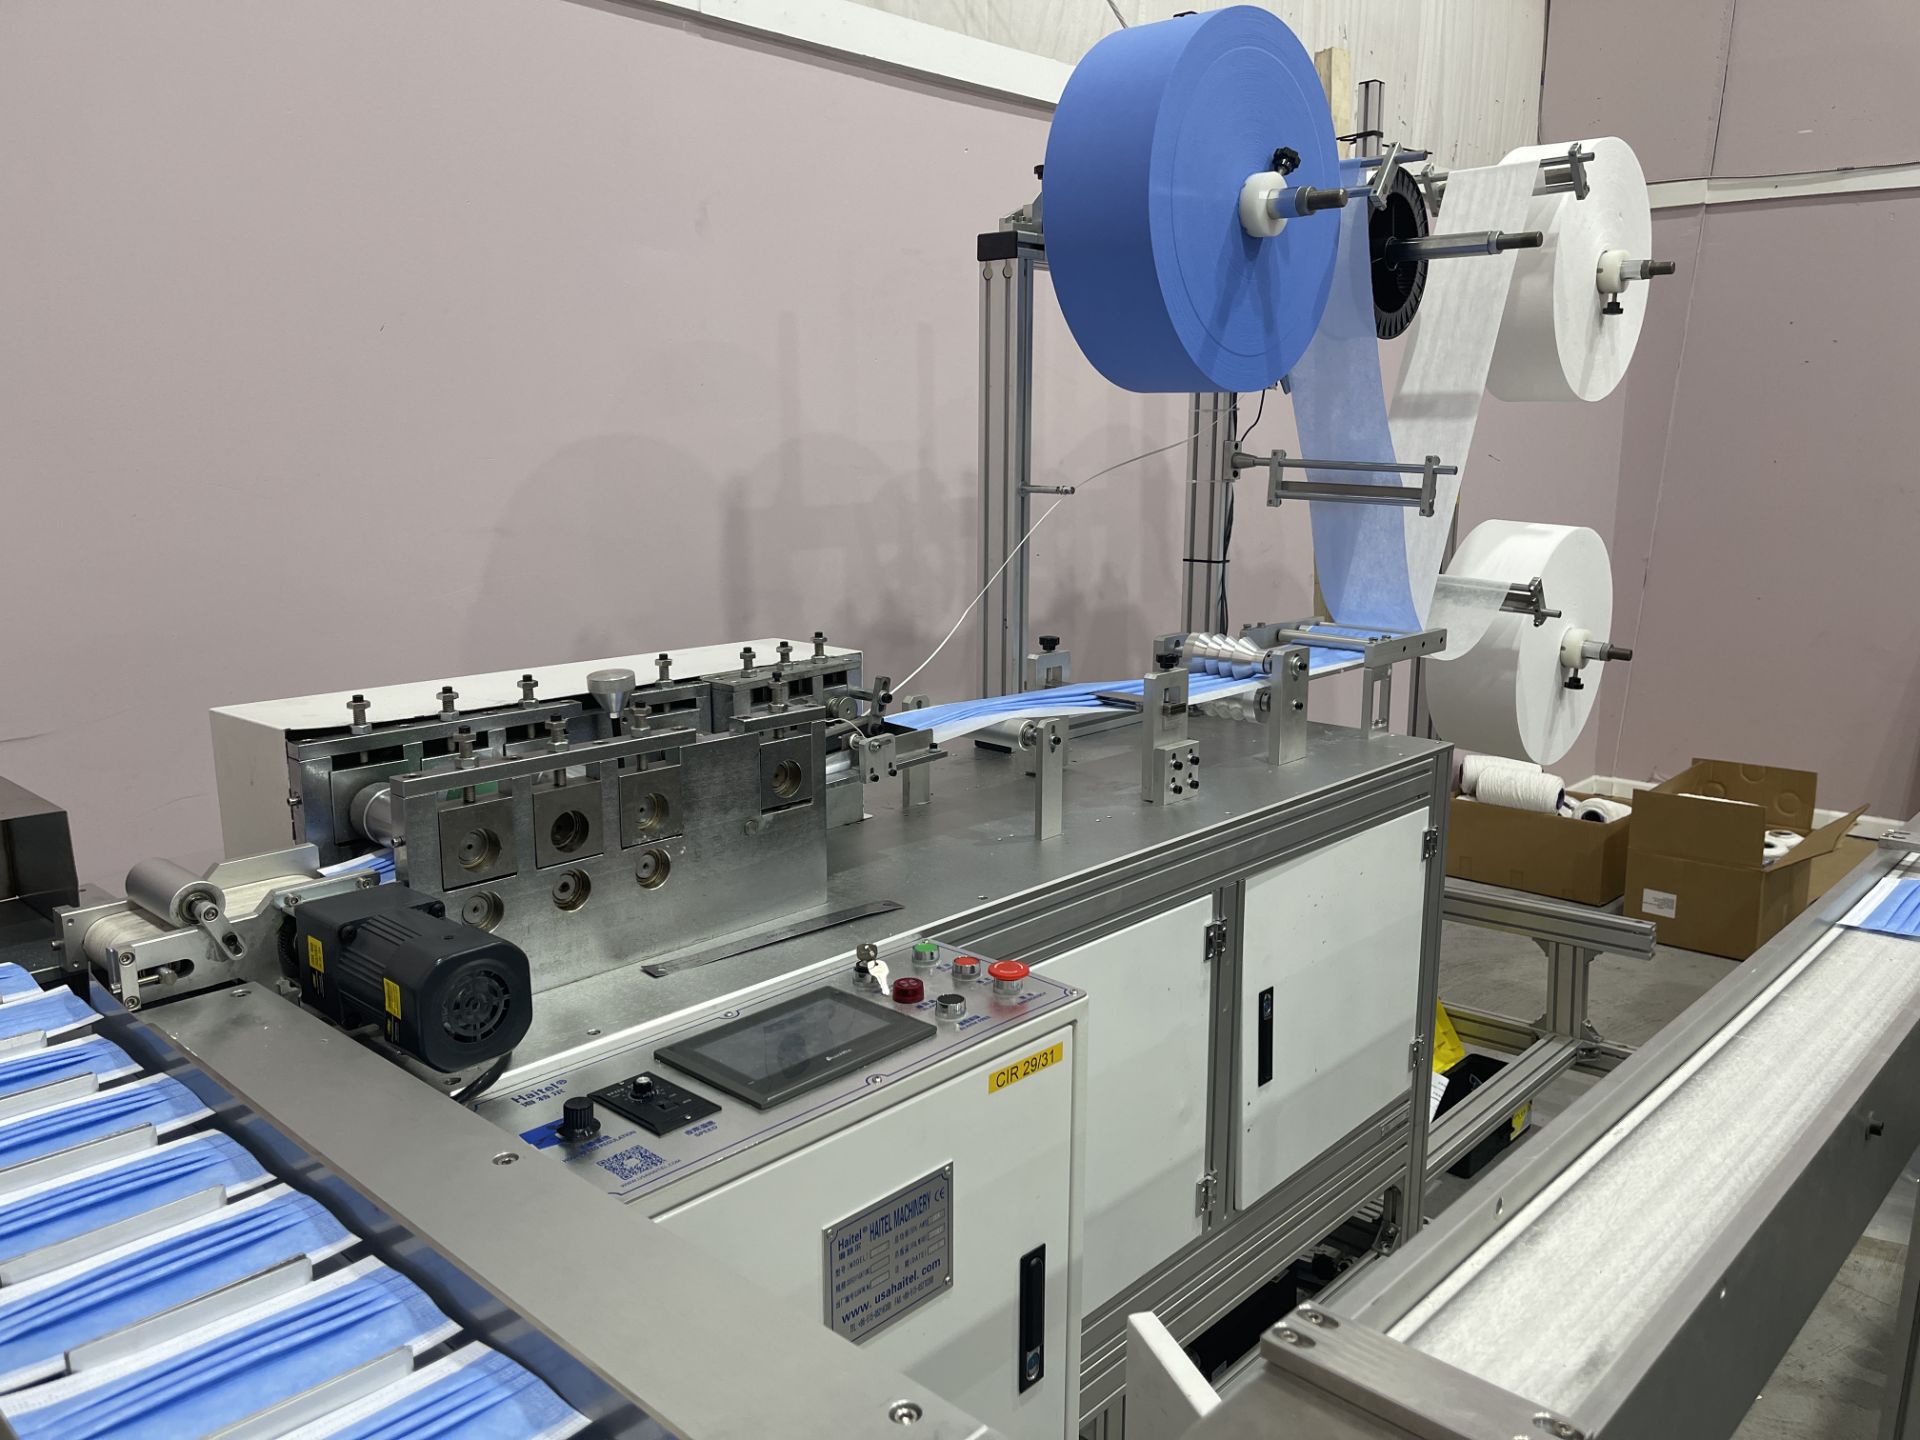 COMPLETE PACKAGE: 2020 3-Ply Disposable Medical Mask Assembly & Packaging Line Equipment, Includes: - Image 96 of 150